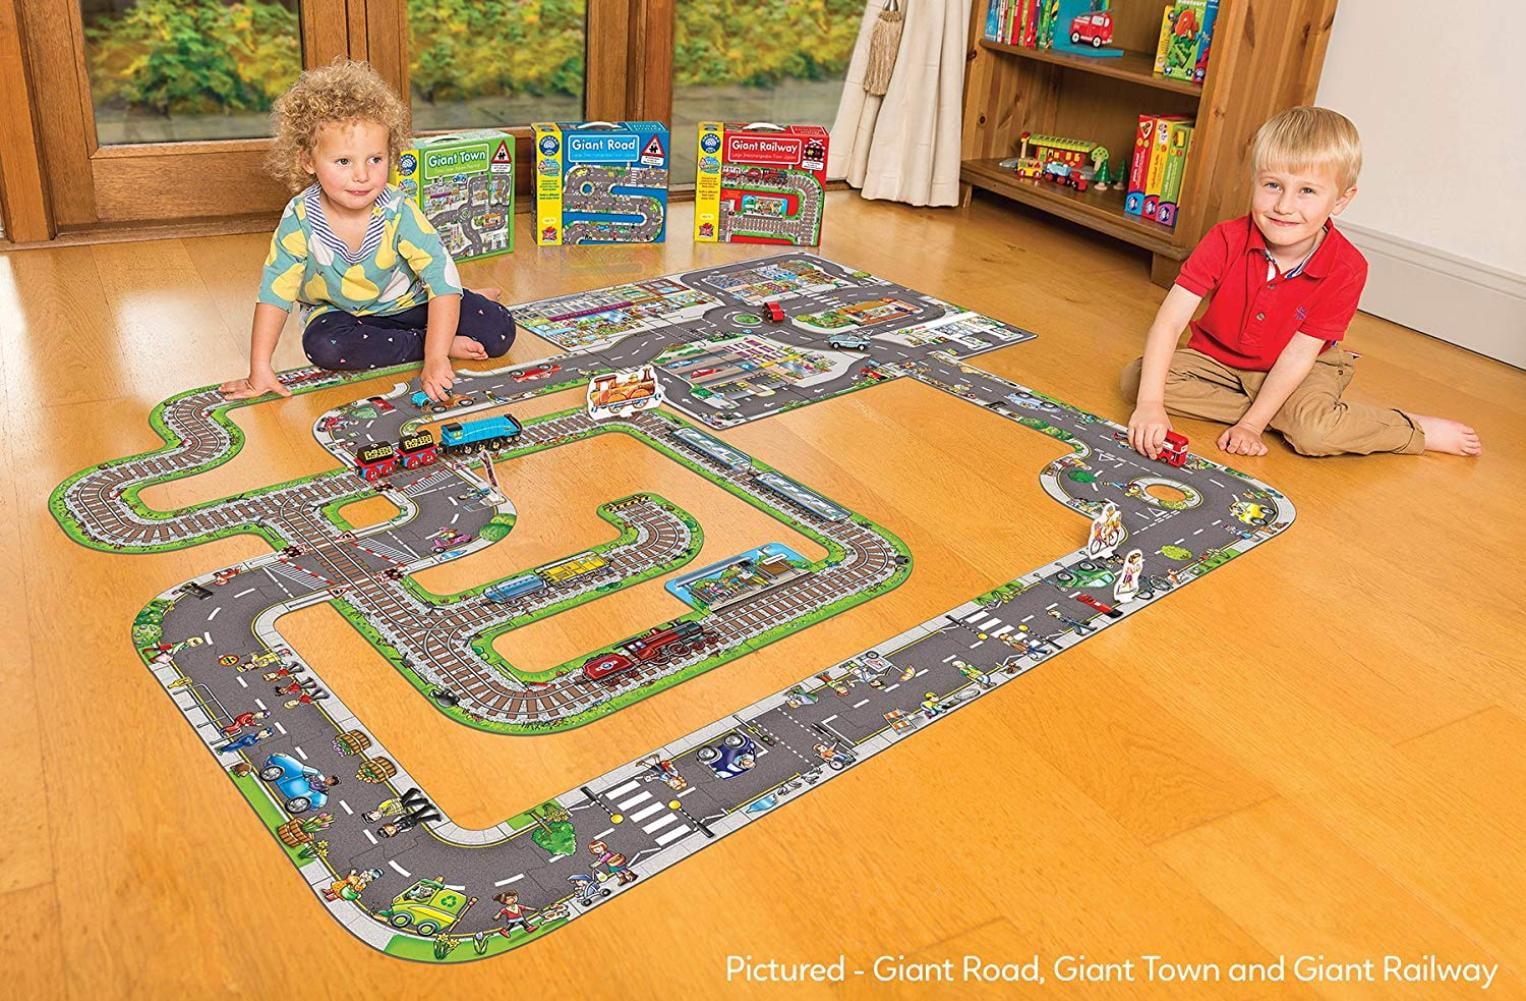 301604 Orchard Toys Giant Road Jigsaw Puzzle 20 Piece 